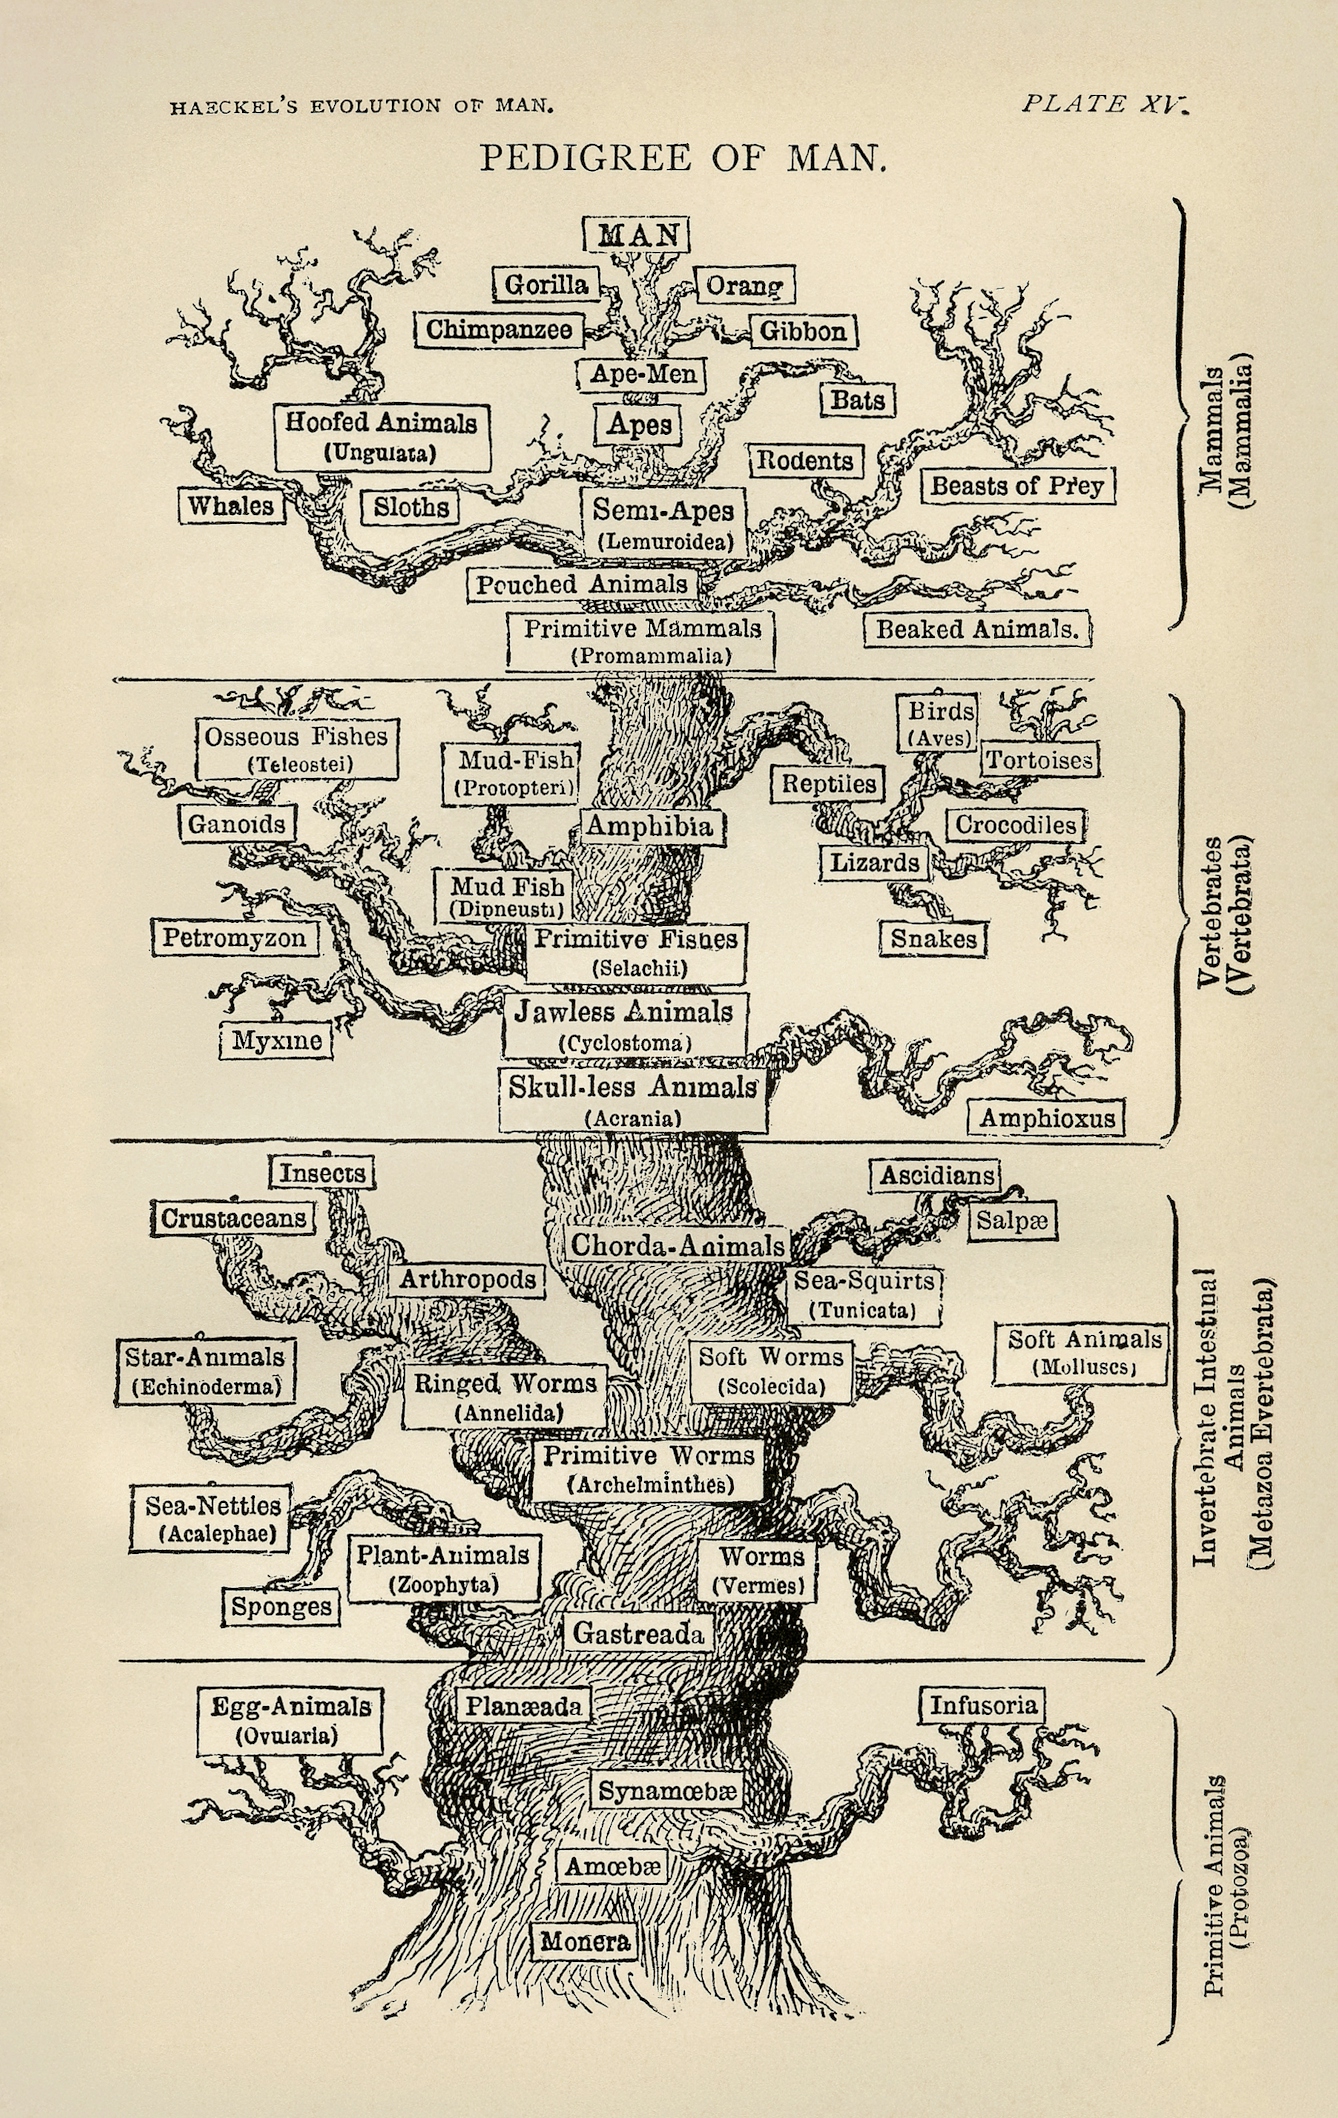 Black and white diagram of a tree titled "Pedigree of Man".  "Amoeba" are at the base and "Man" is at the crown of the tree; for Haeckel, as for many early evolutionists, humans were considered the pinnacle of evolution. 